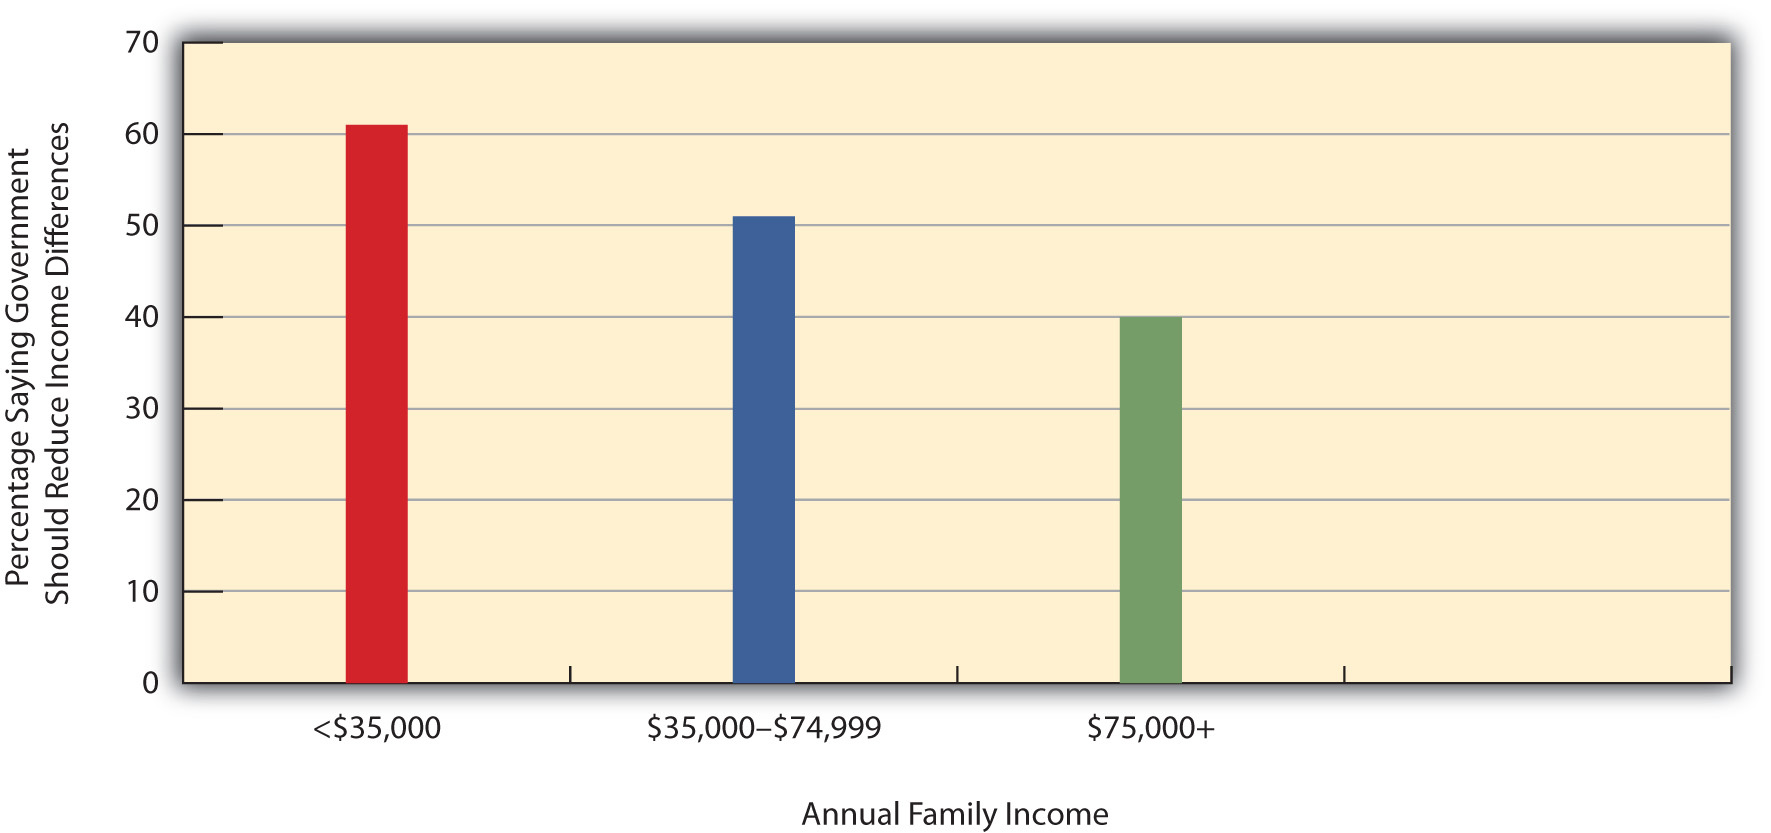 Annual Family Income and Belief That Government “Should Reduce Income Differences Between the Rich and Poor”